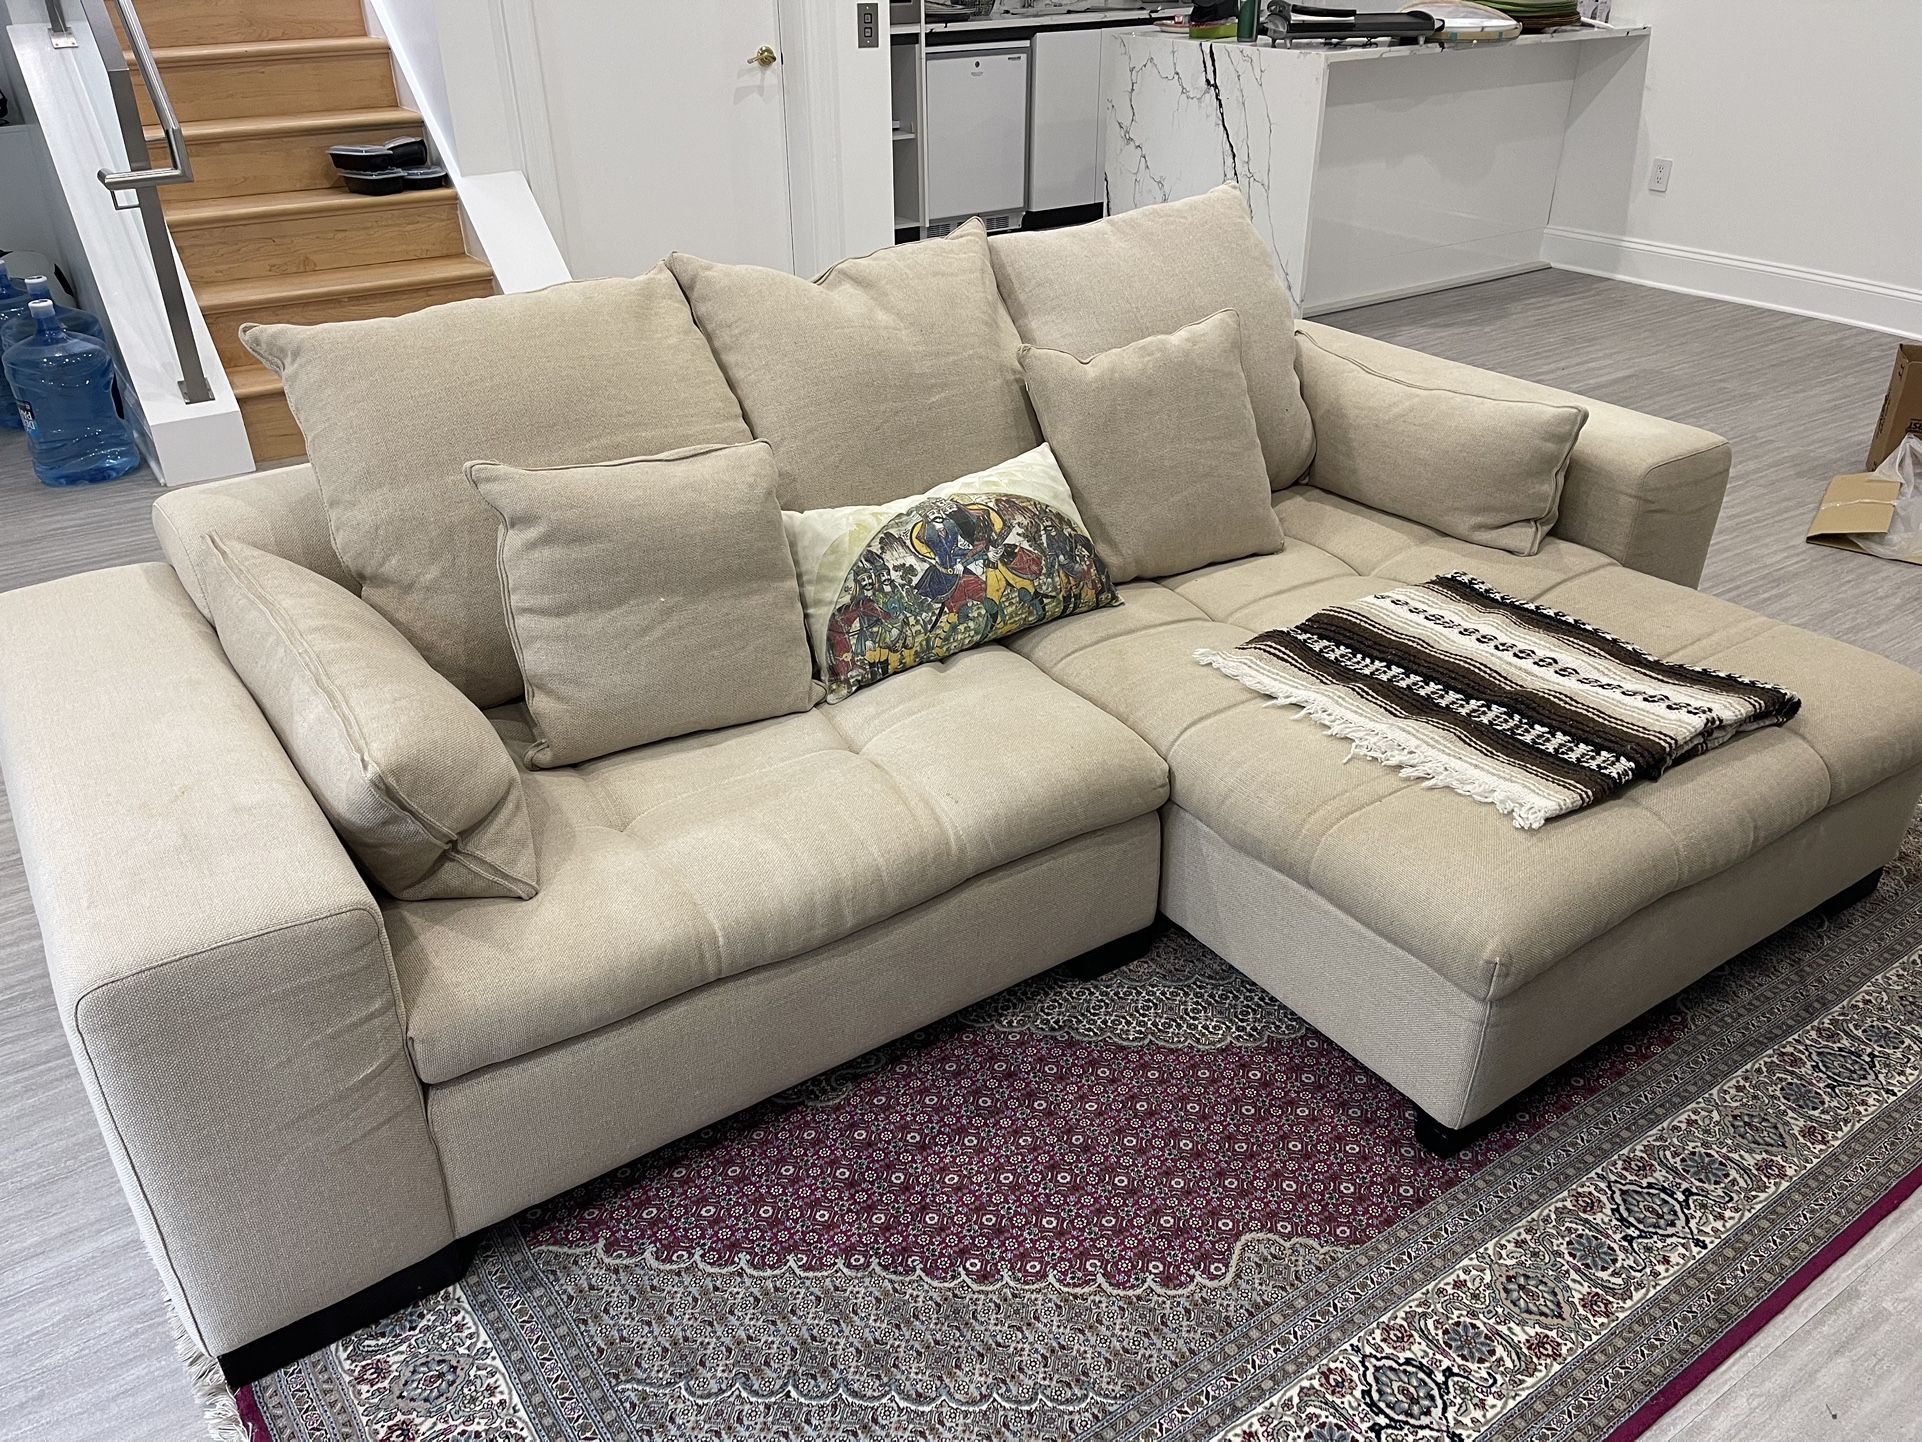 Theodore’s sectional sofa